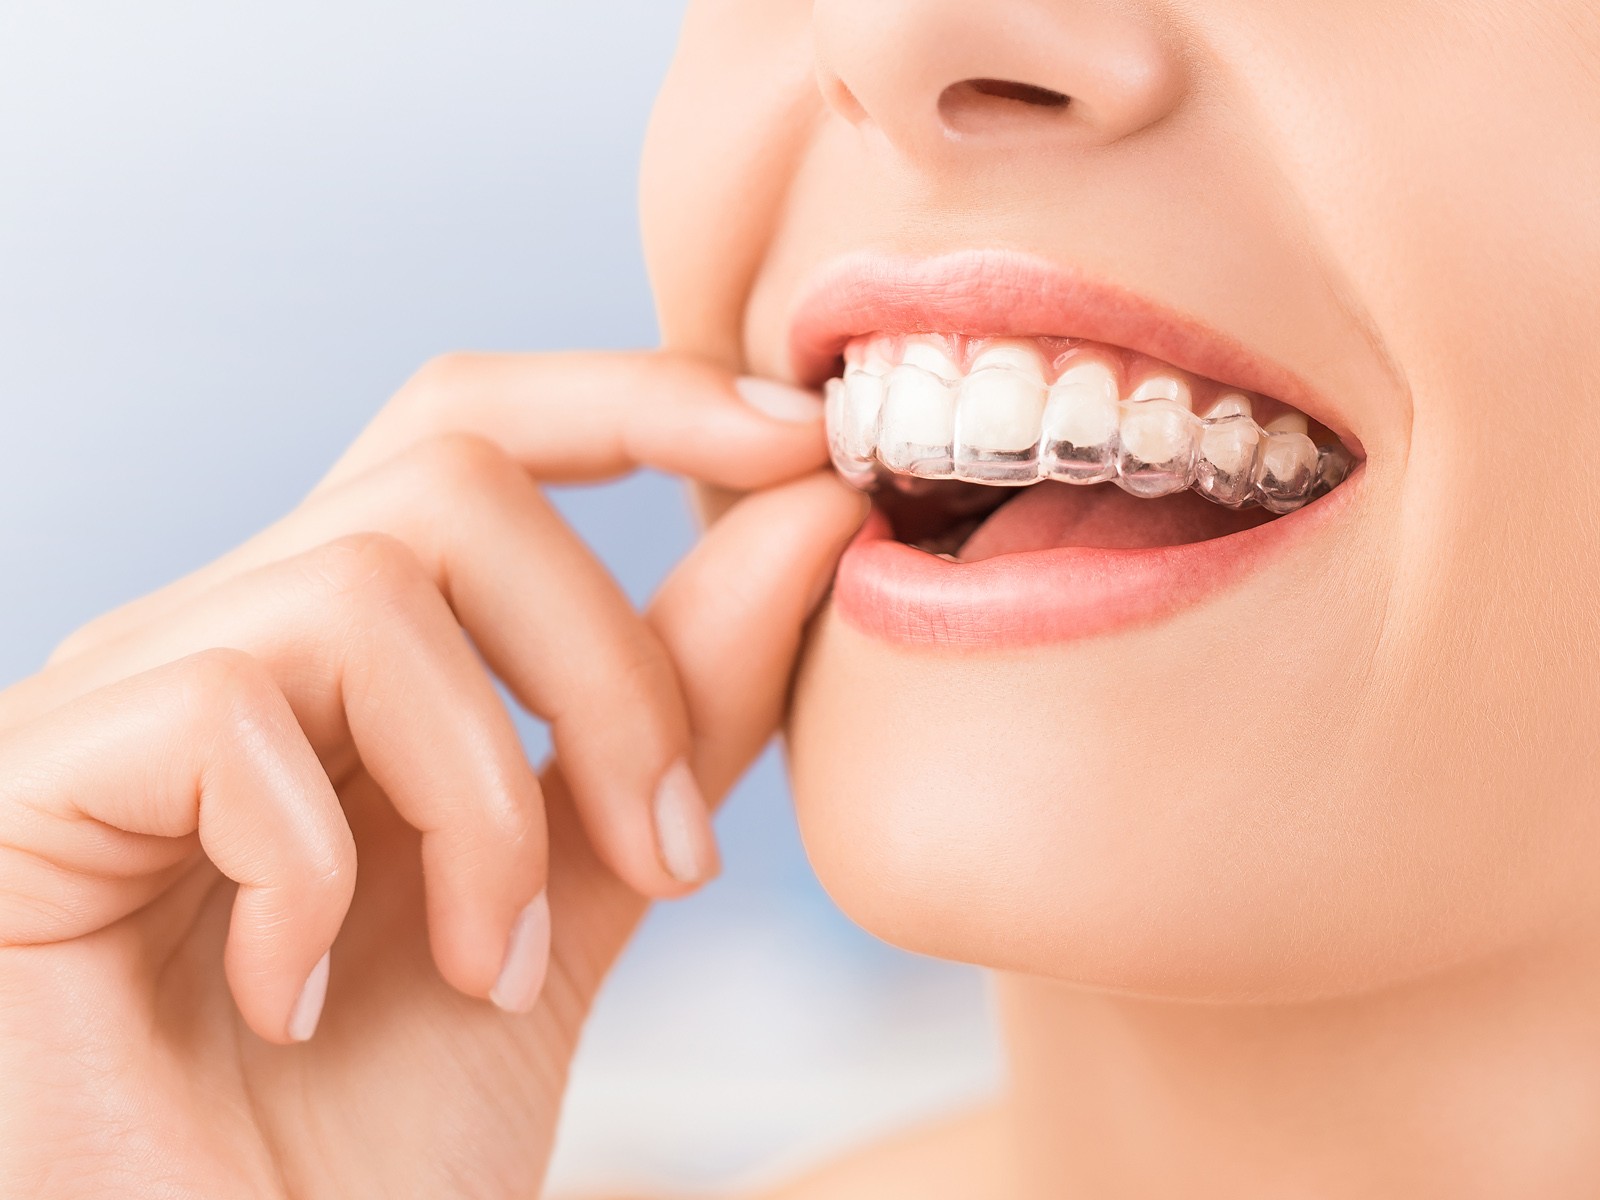 Do I have to brush my teeth every time I eat with Invisalign?